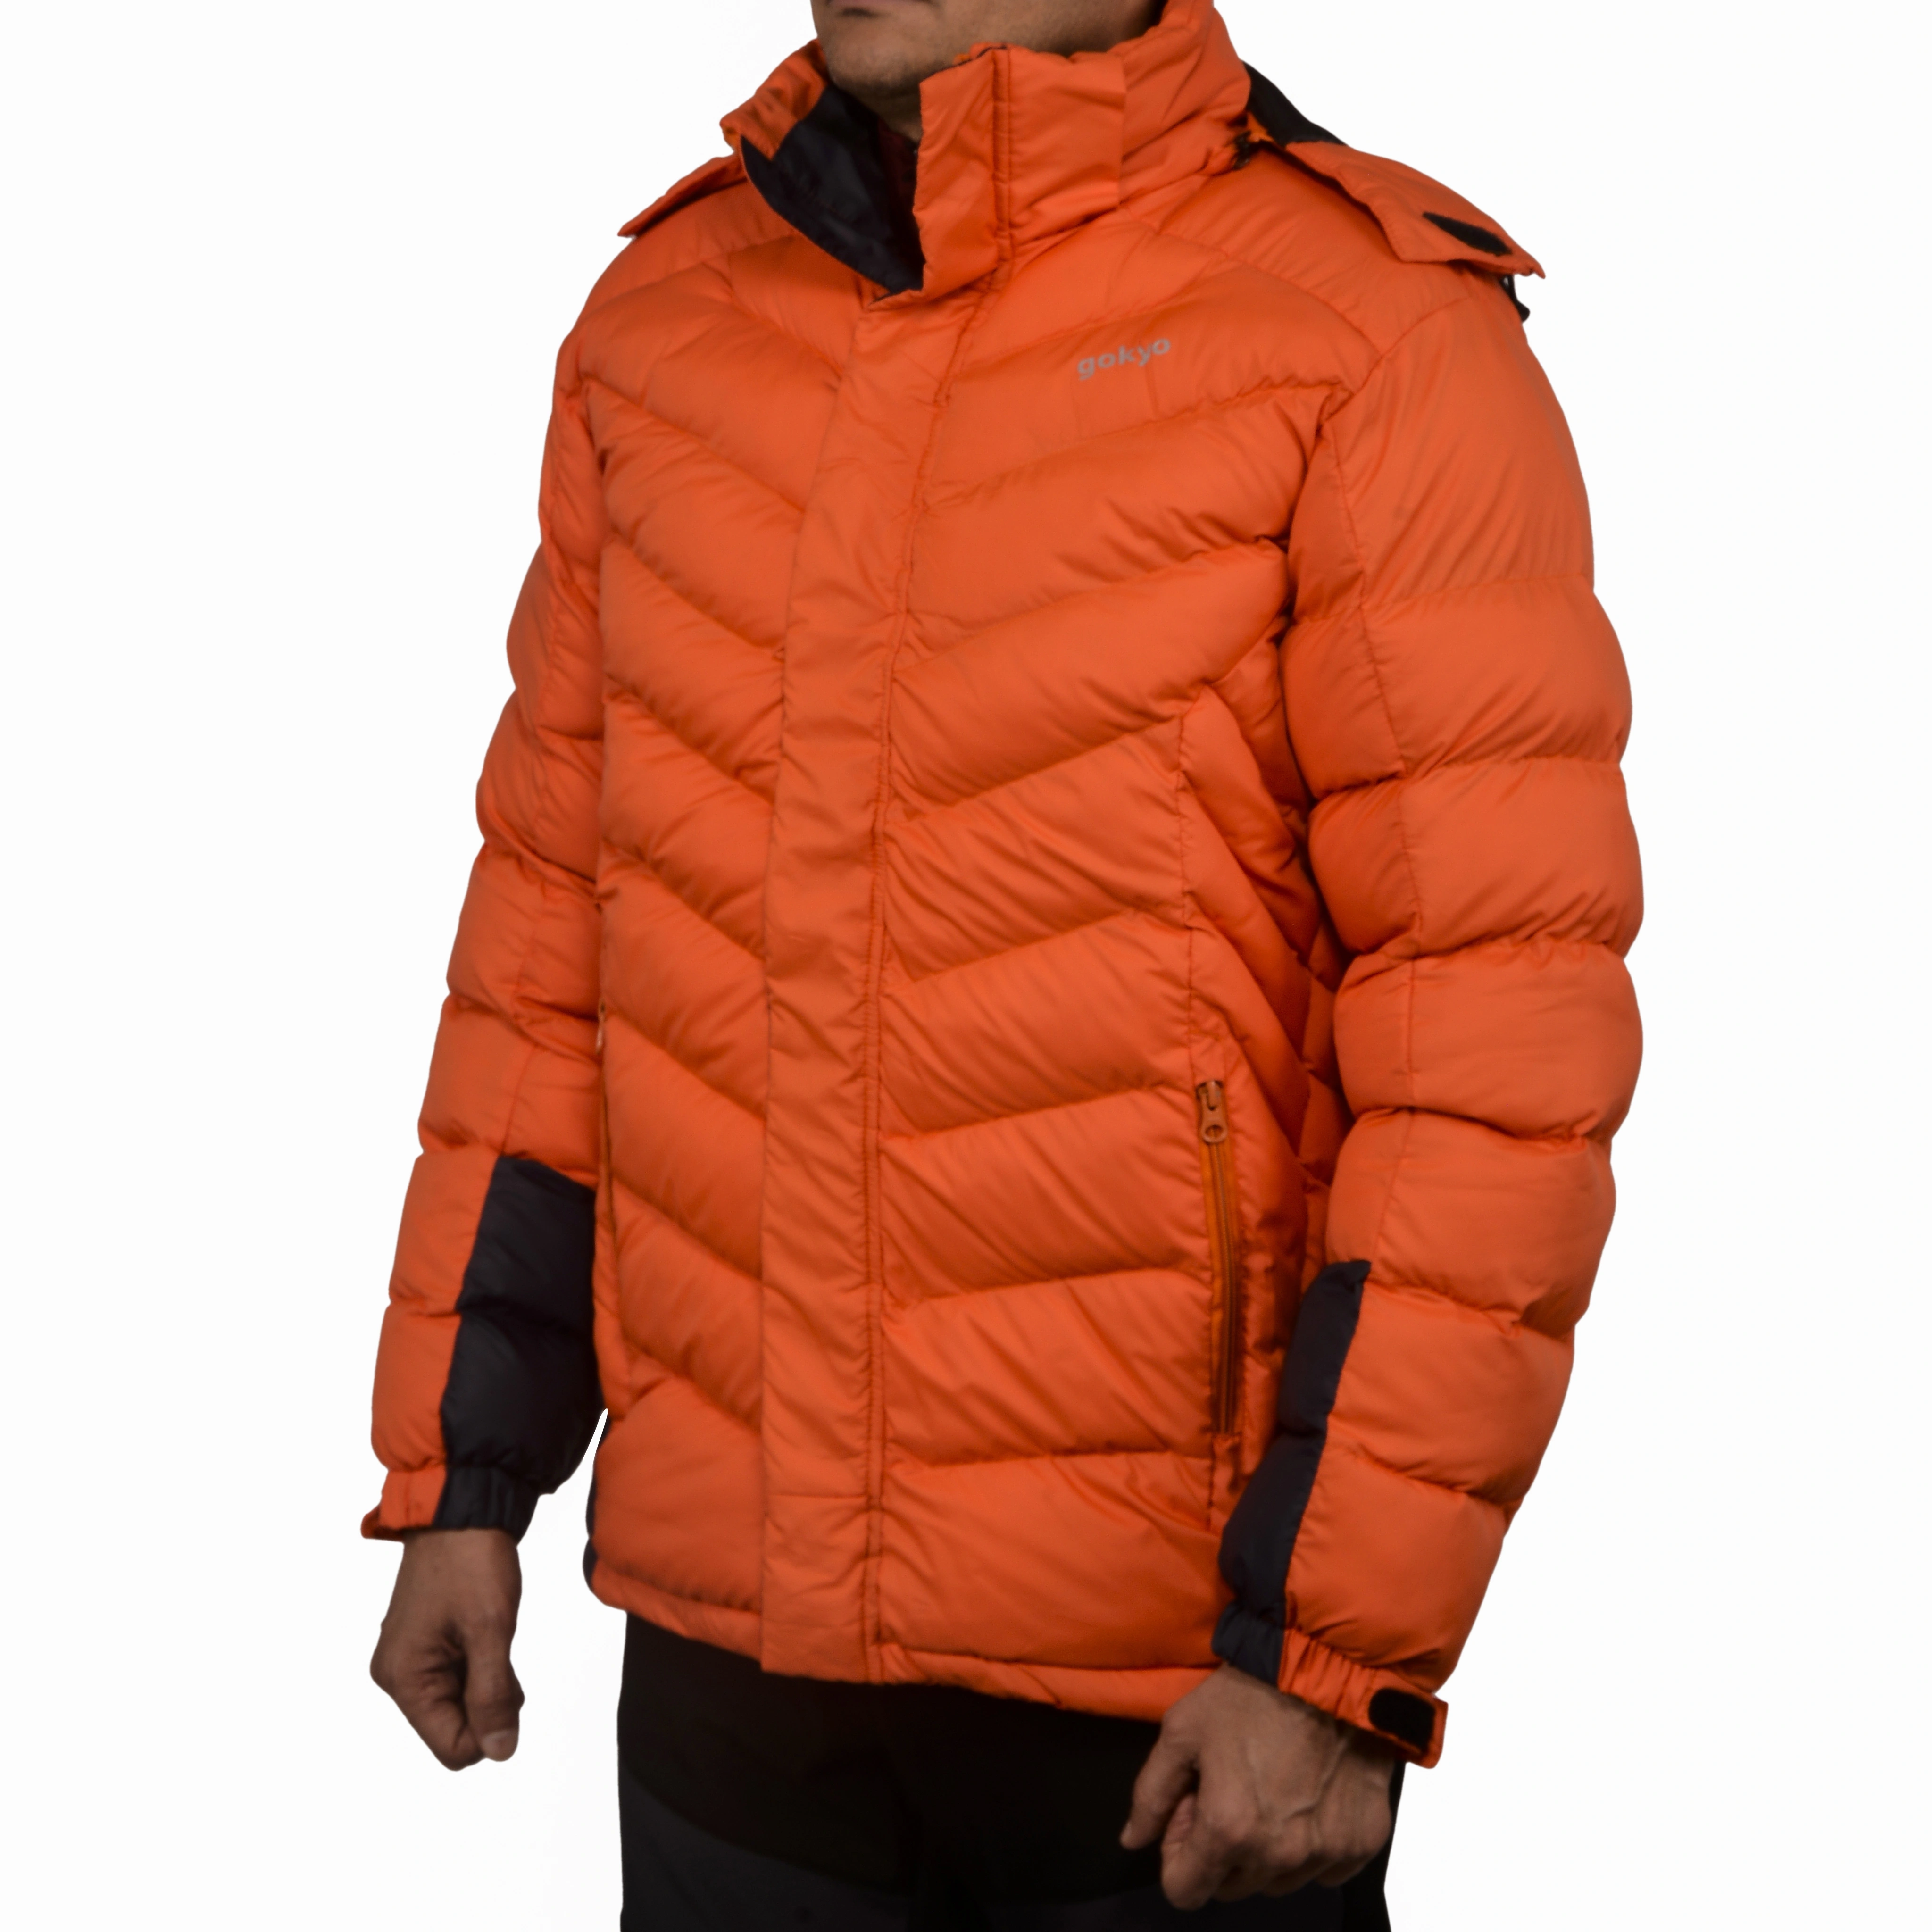 K2 Survivor Down Jacket for Men: Stylized Functionality for Extreme Cold Weather Expeditions (Up to -20°C)-3XL-Orange-2